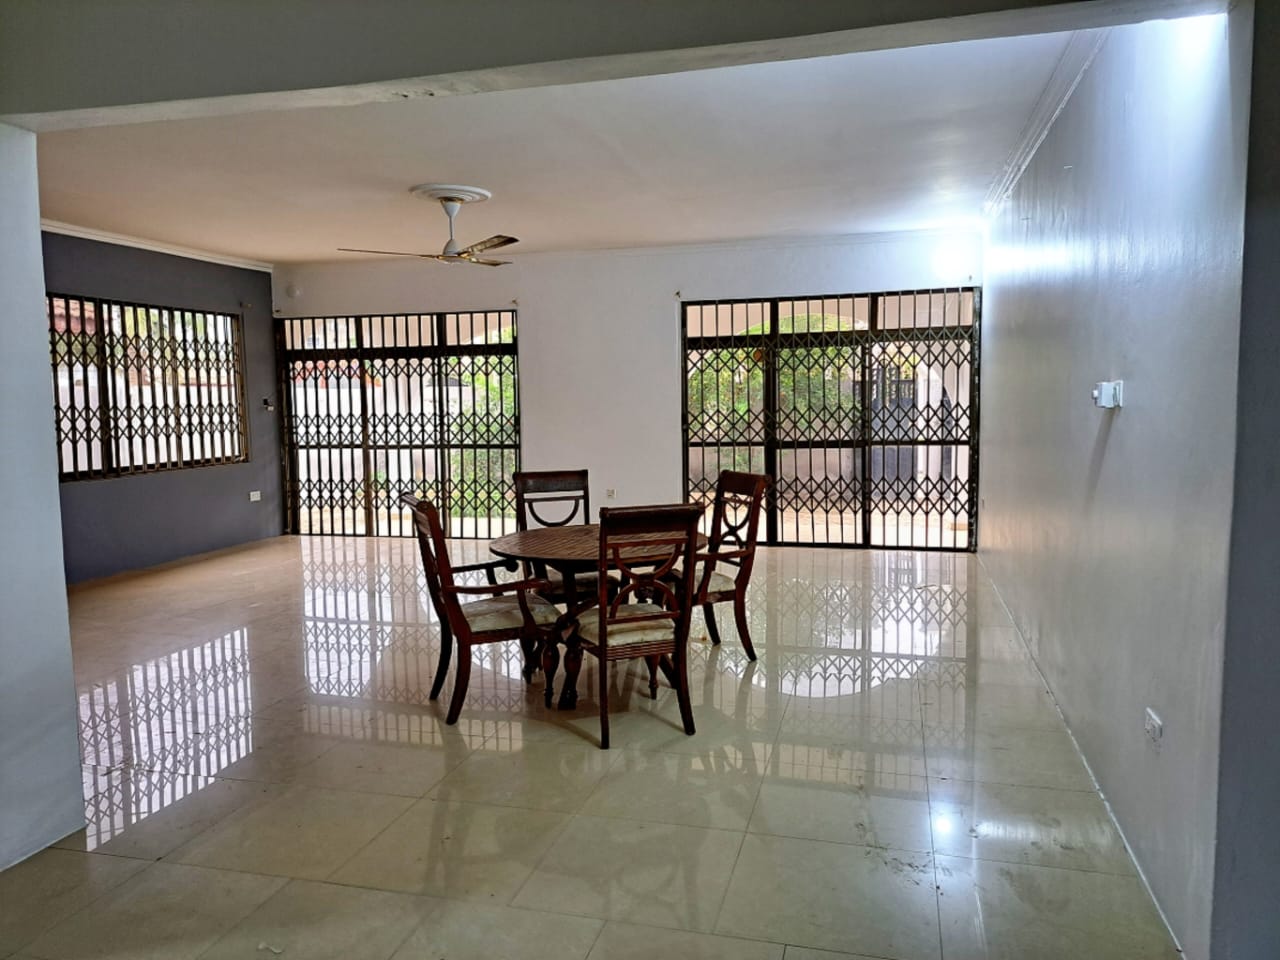 3 Bedroom House For Rent At Spintex